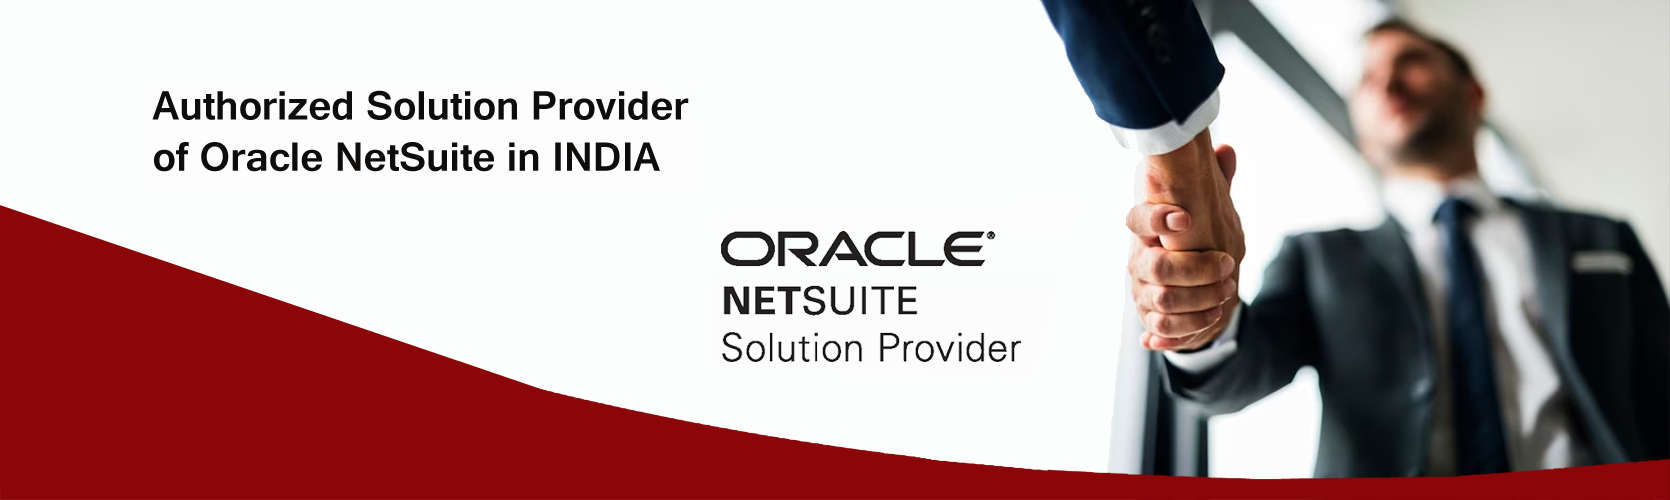 Authorized Solution Provider of Oracle NetSuite